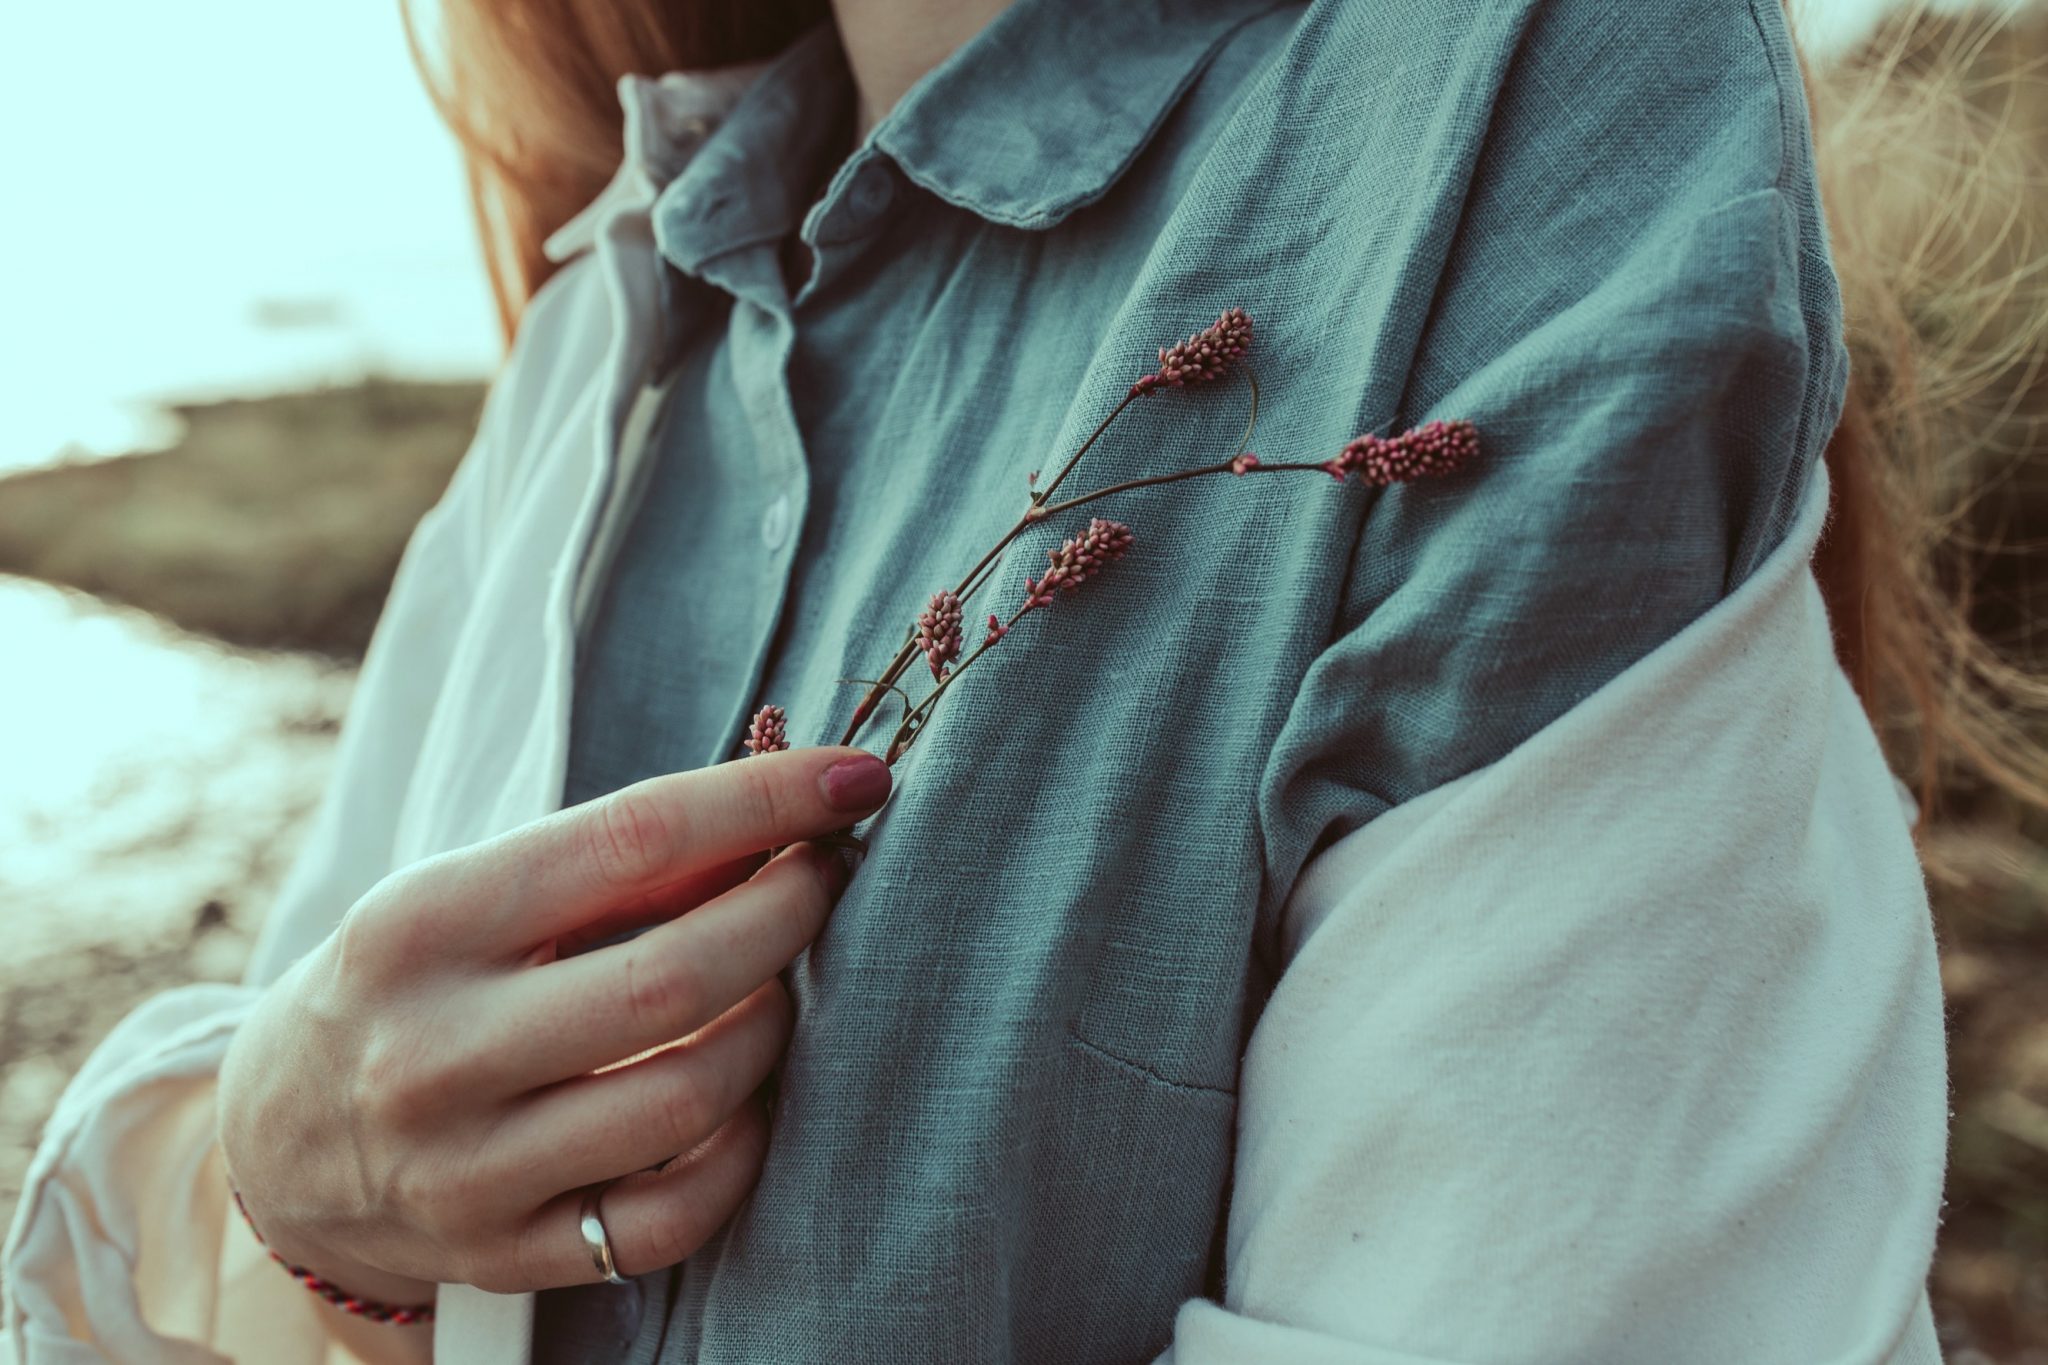 A close-up of woman's hand holding a wild flower. A young ginger woman standing by the lake shore in summertime. A red headed girl wearing i linen aquamarine blouse and linen white jacket.